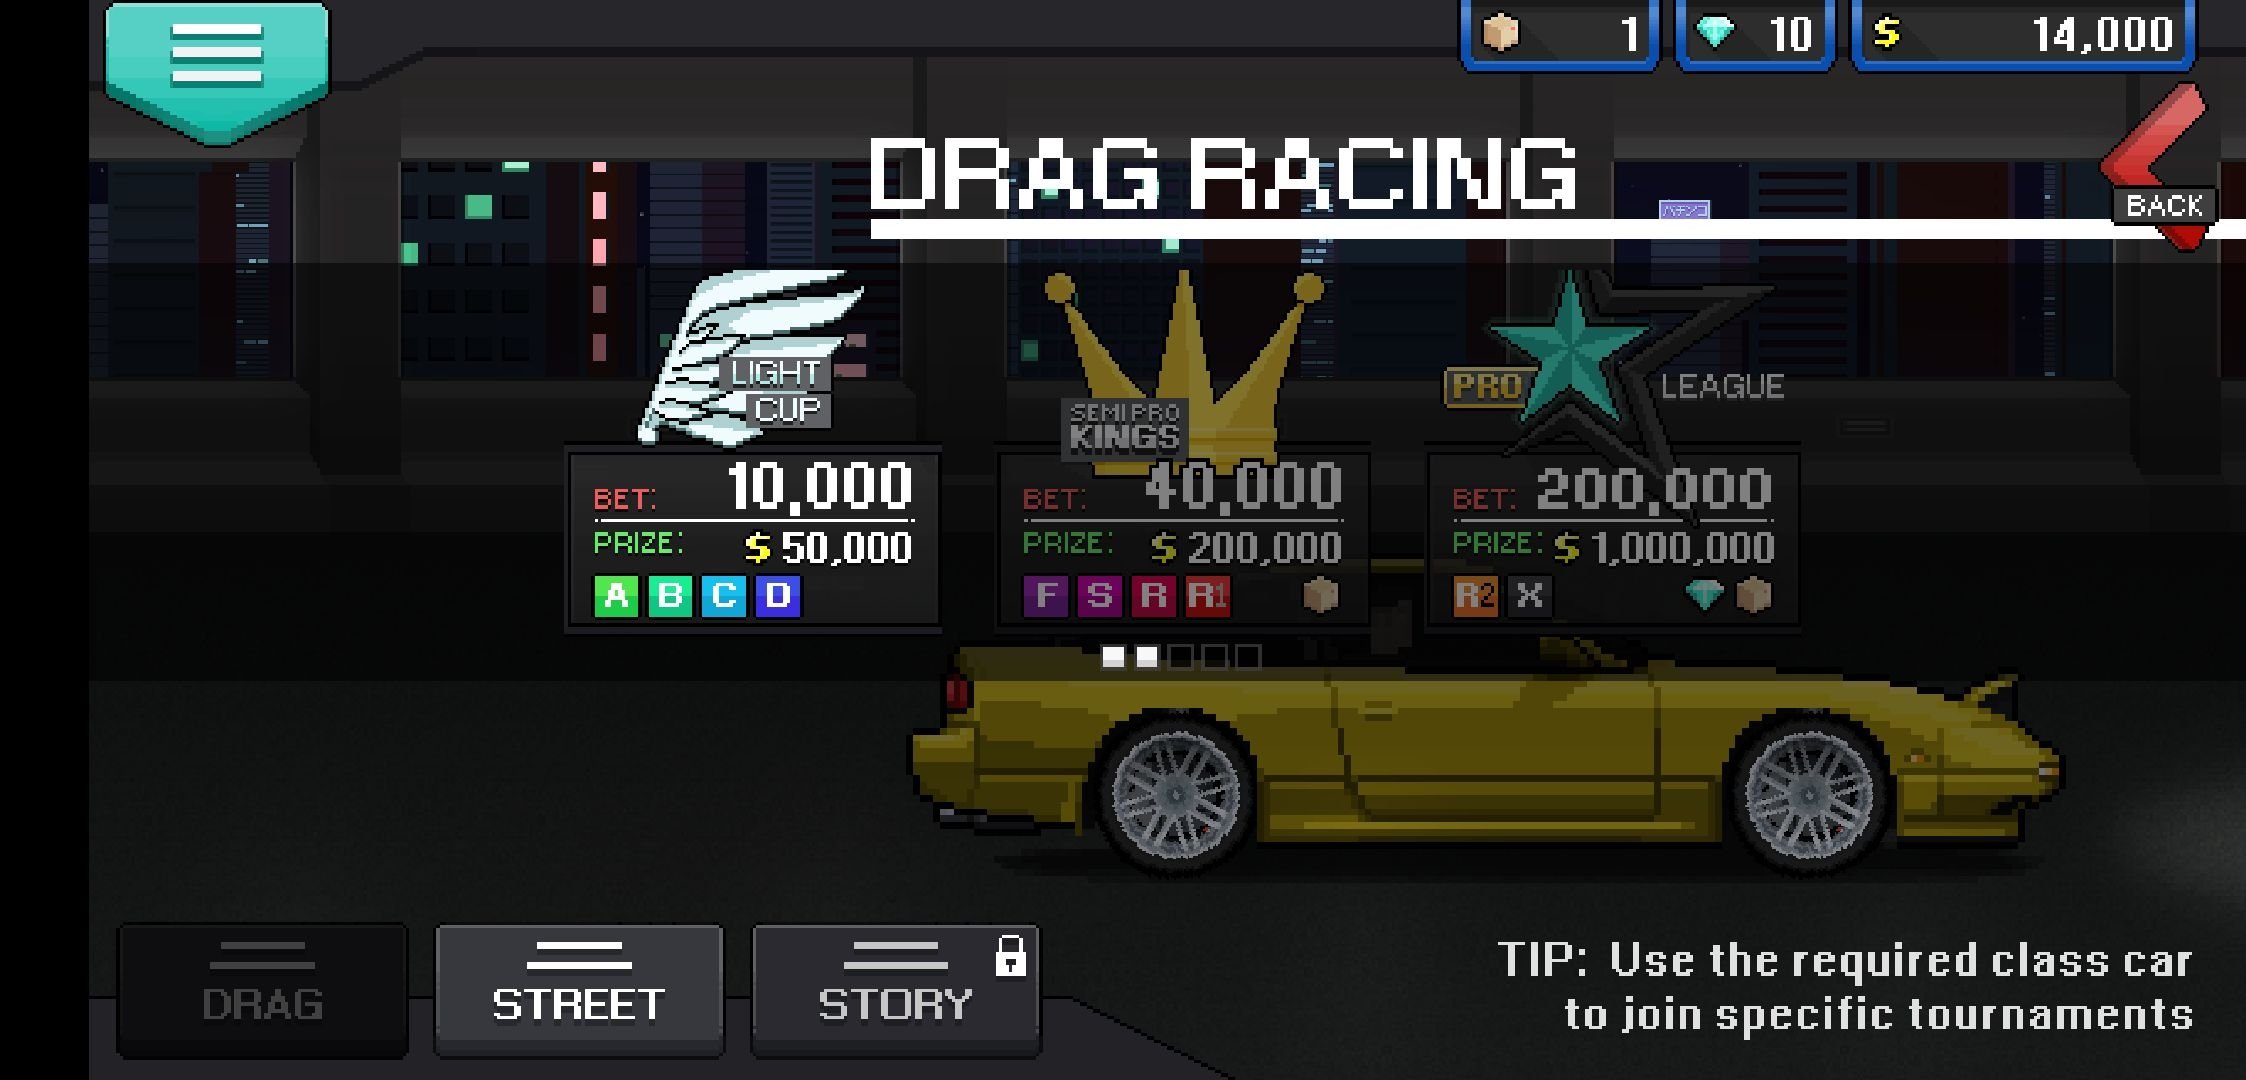 pixel car racer cheats android